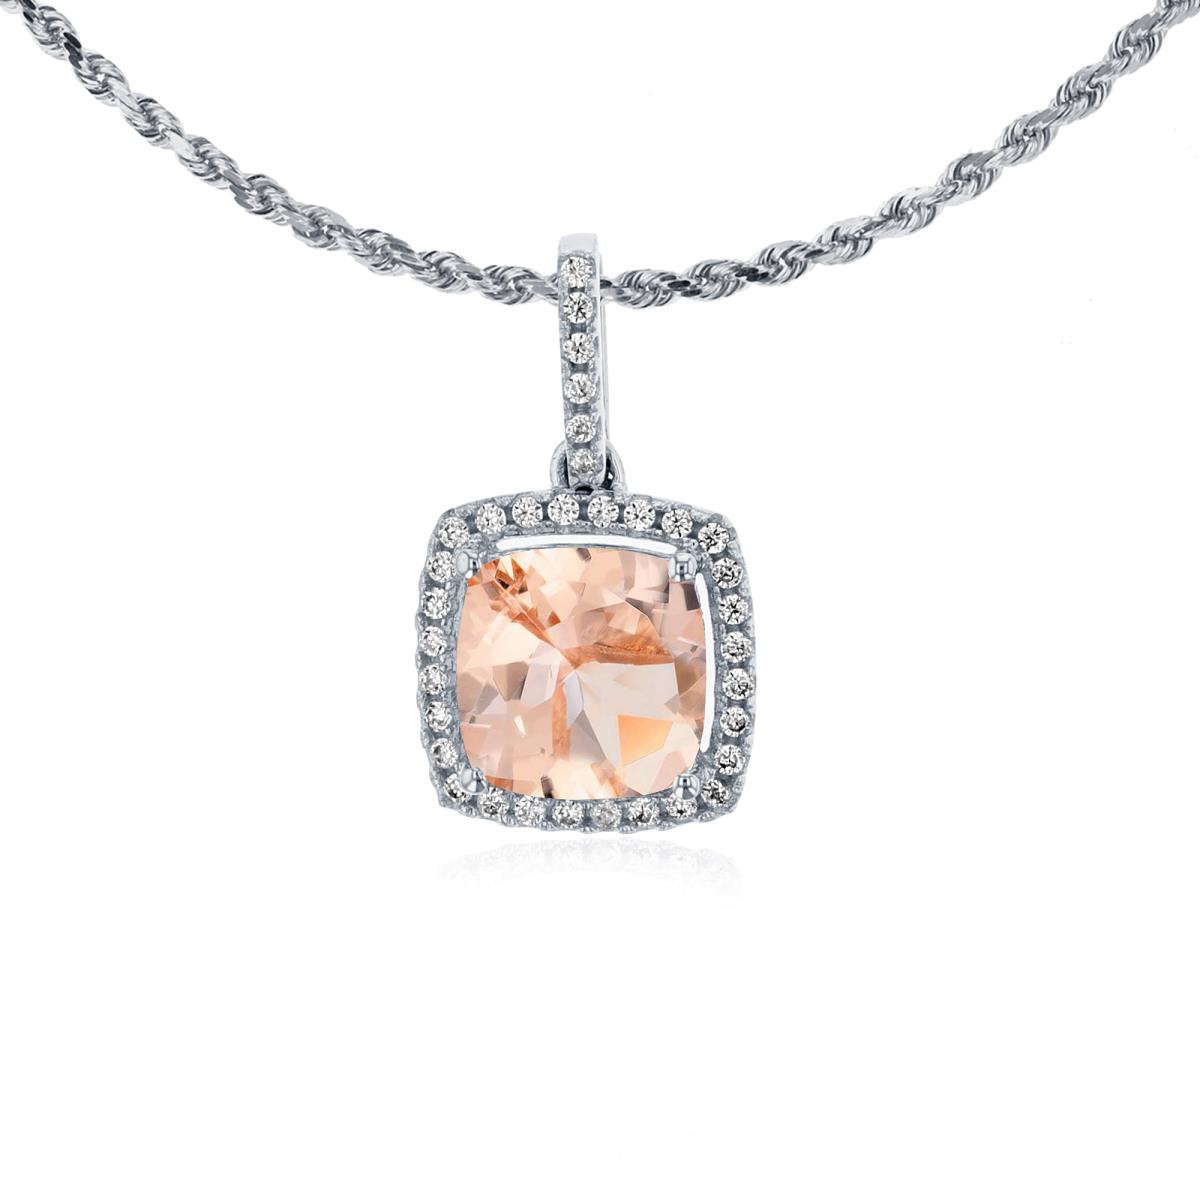 10K White Gold 7mm Cushion Morganite & 0.14 CTTW Rnd Diamond Halo 18" Rope Chain Necklace